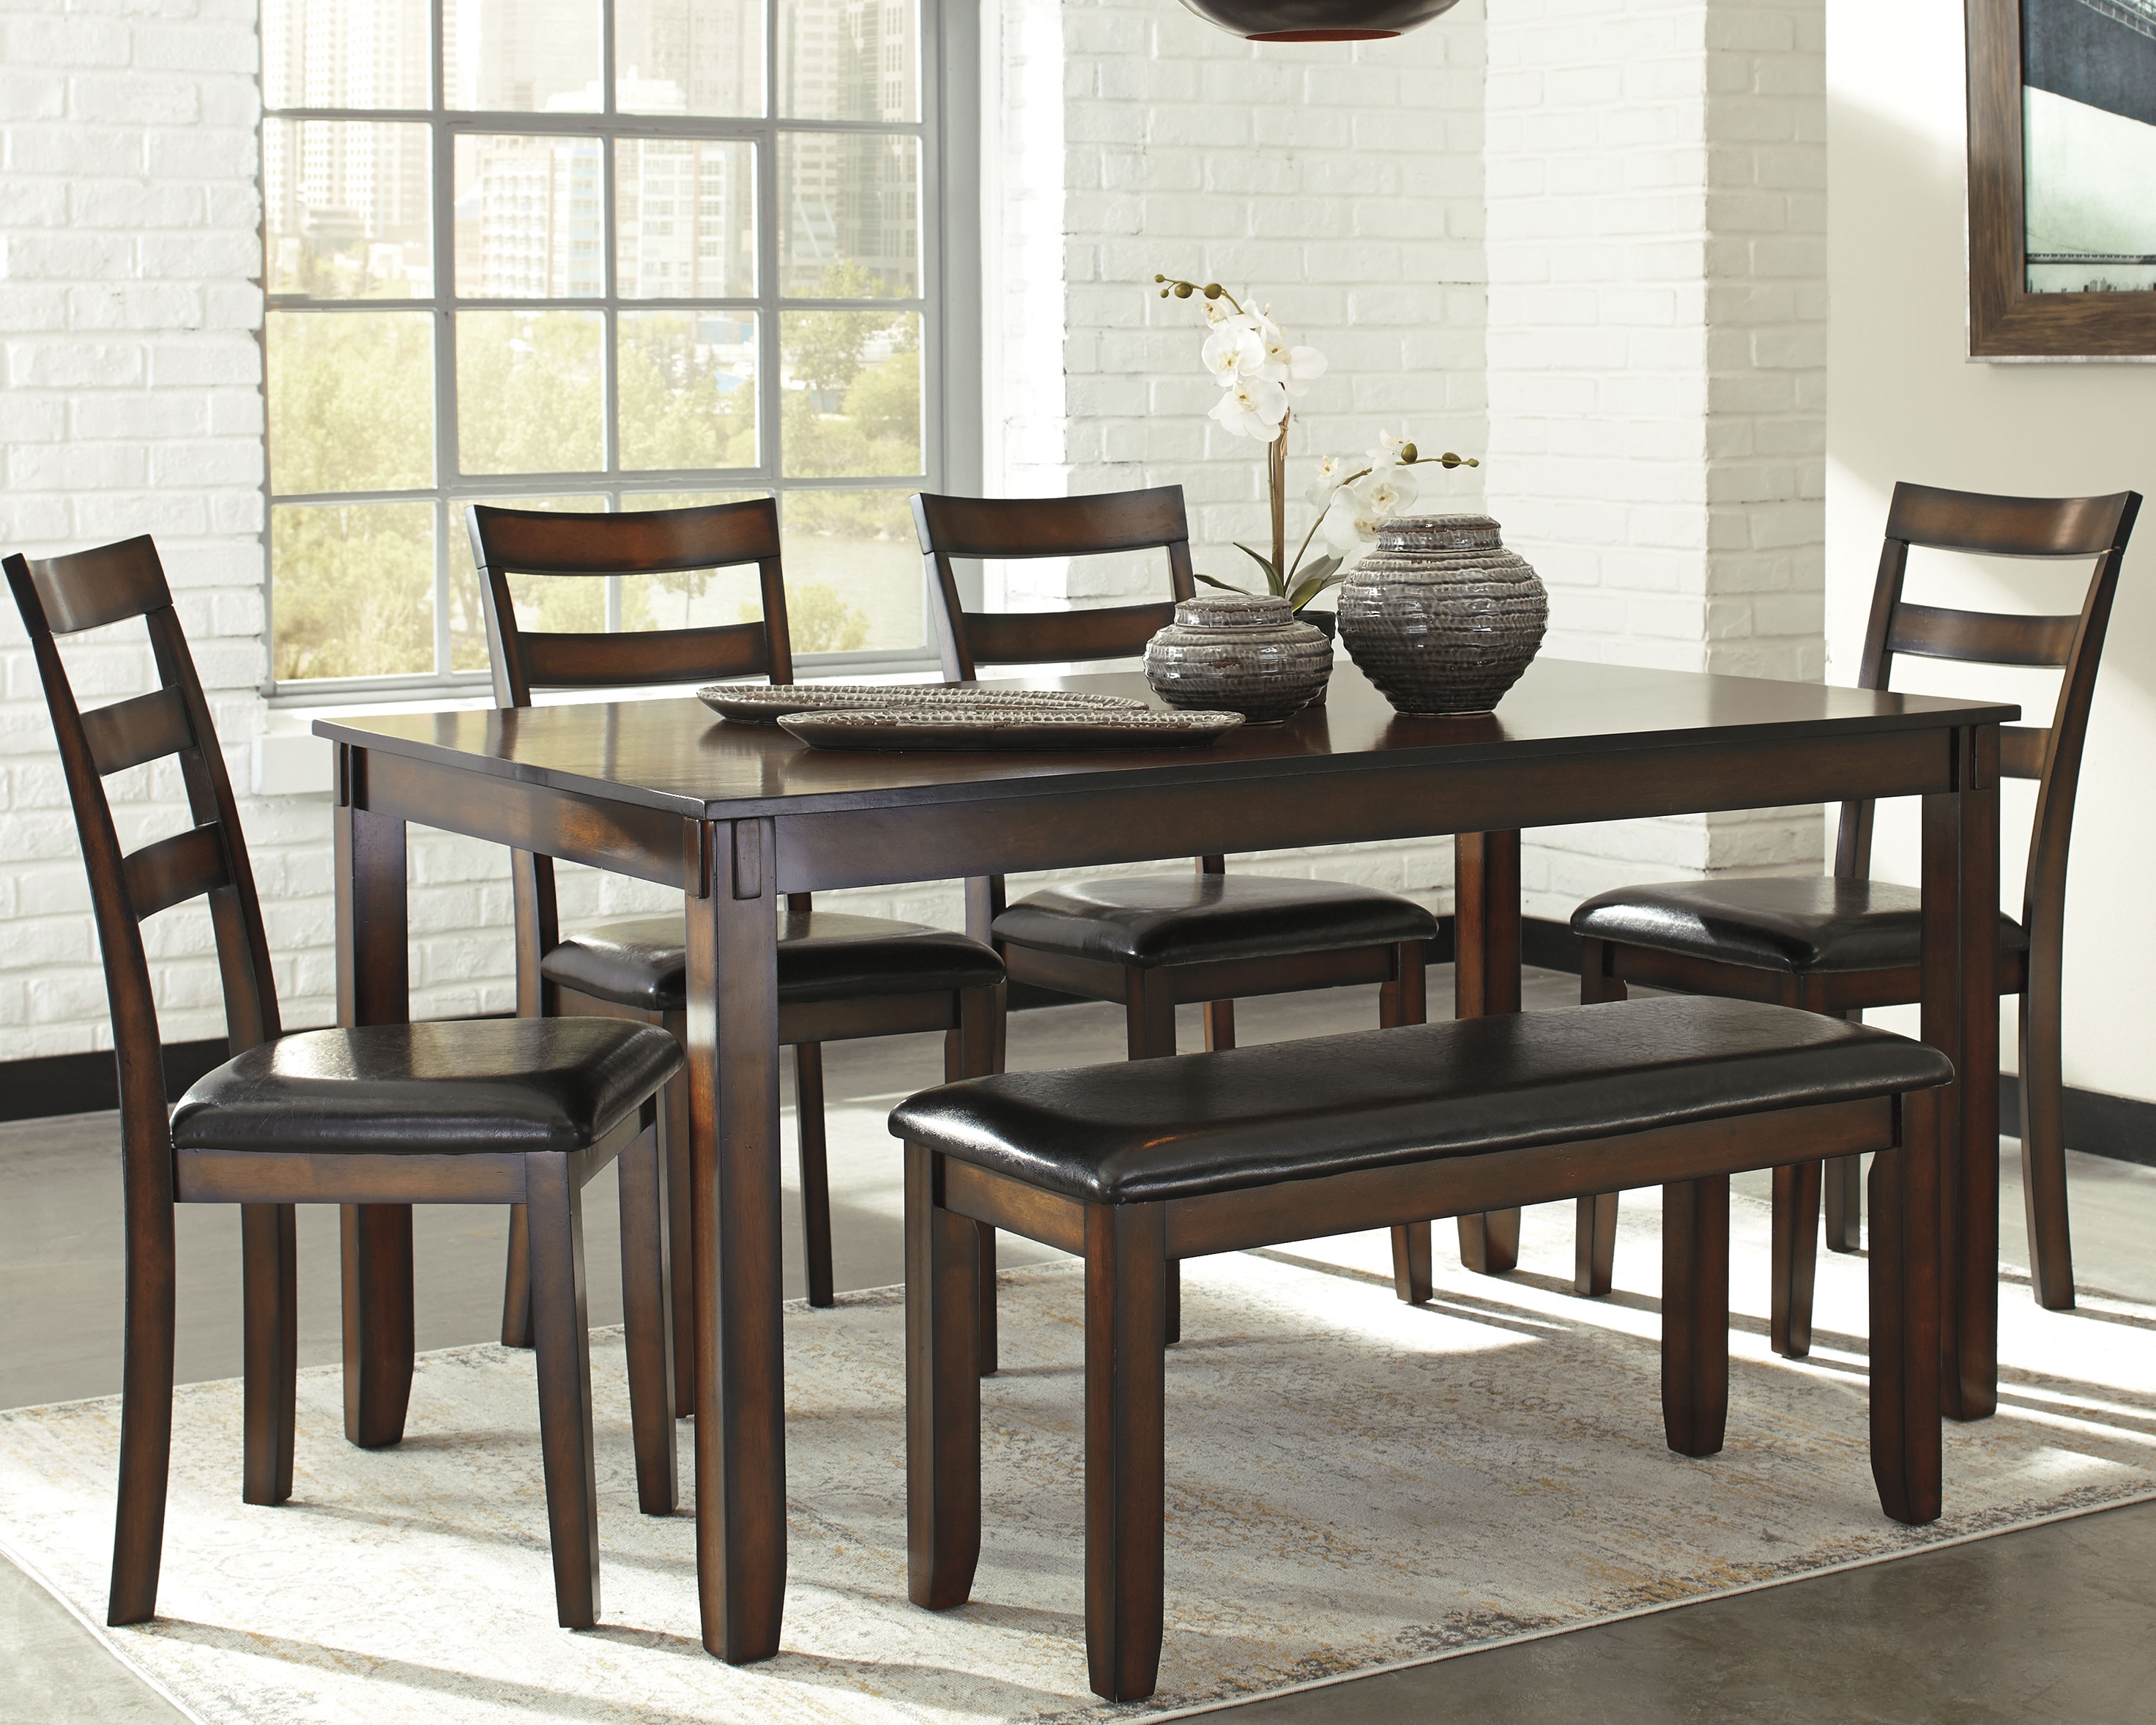 Coviar Dining Room Table and Chairs with Bench (Set of 6) | Duplex